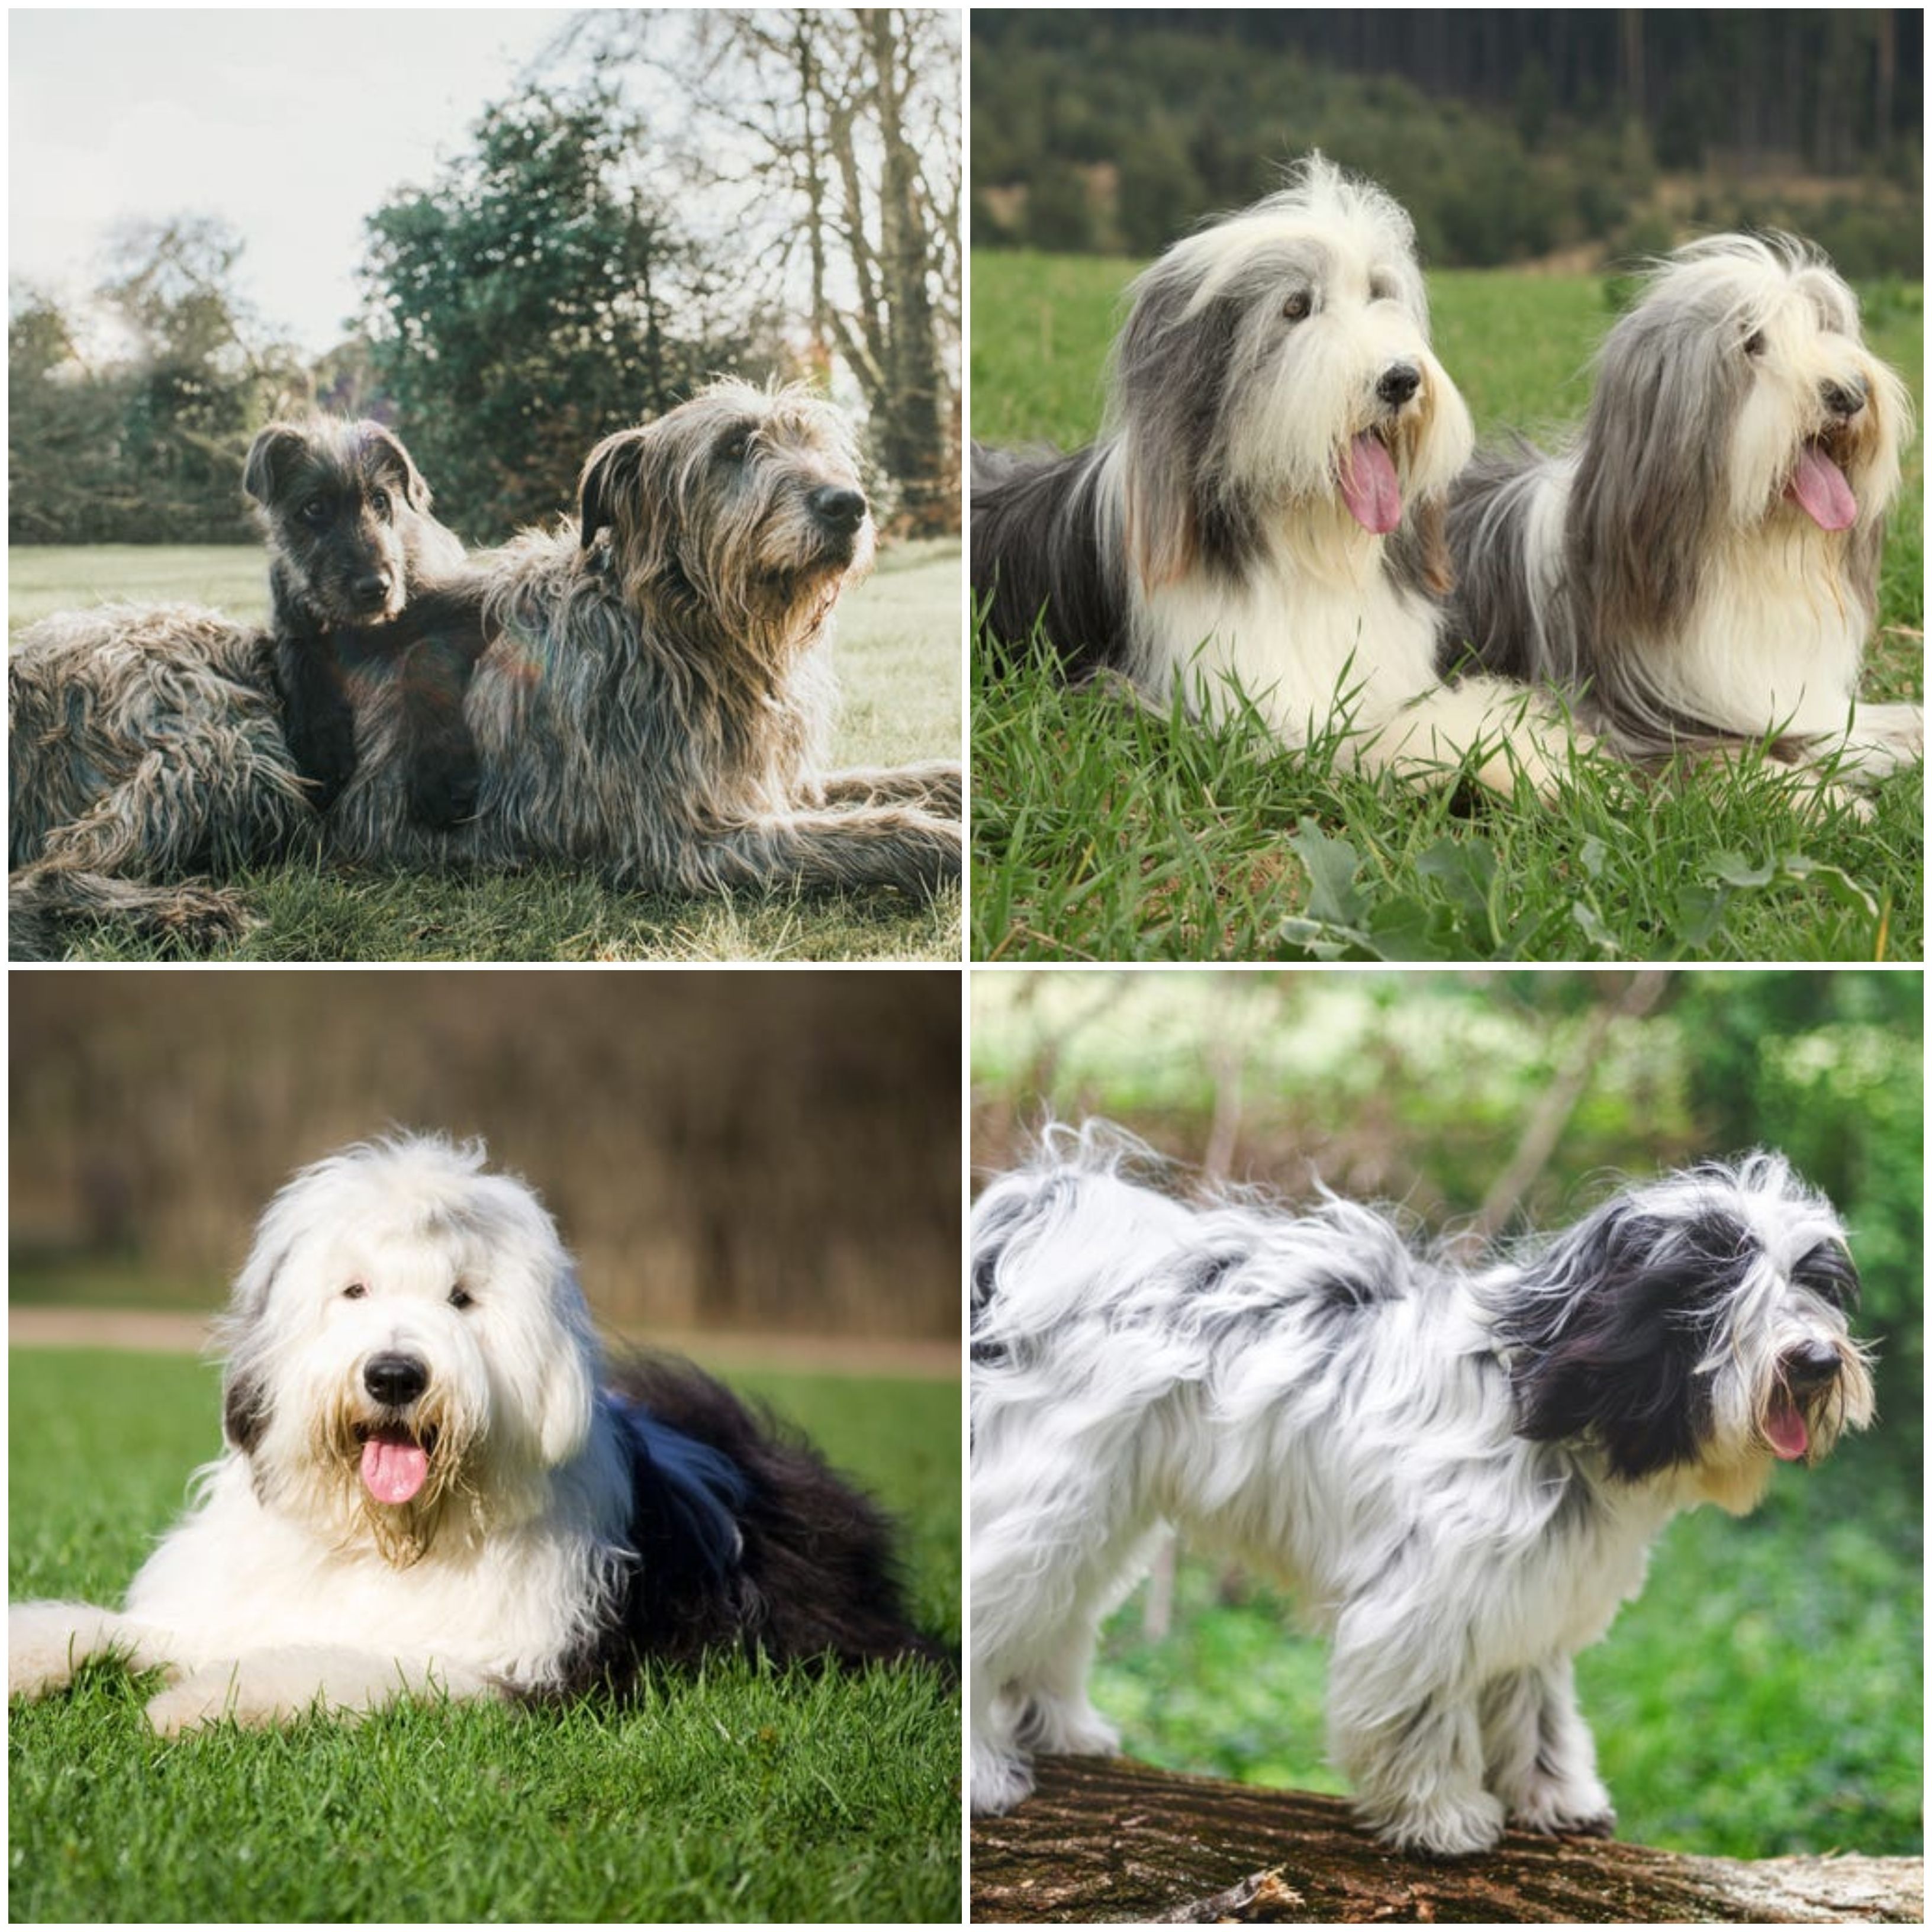 Shaggy Haired Dog Breeds